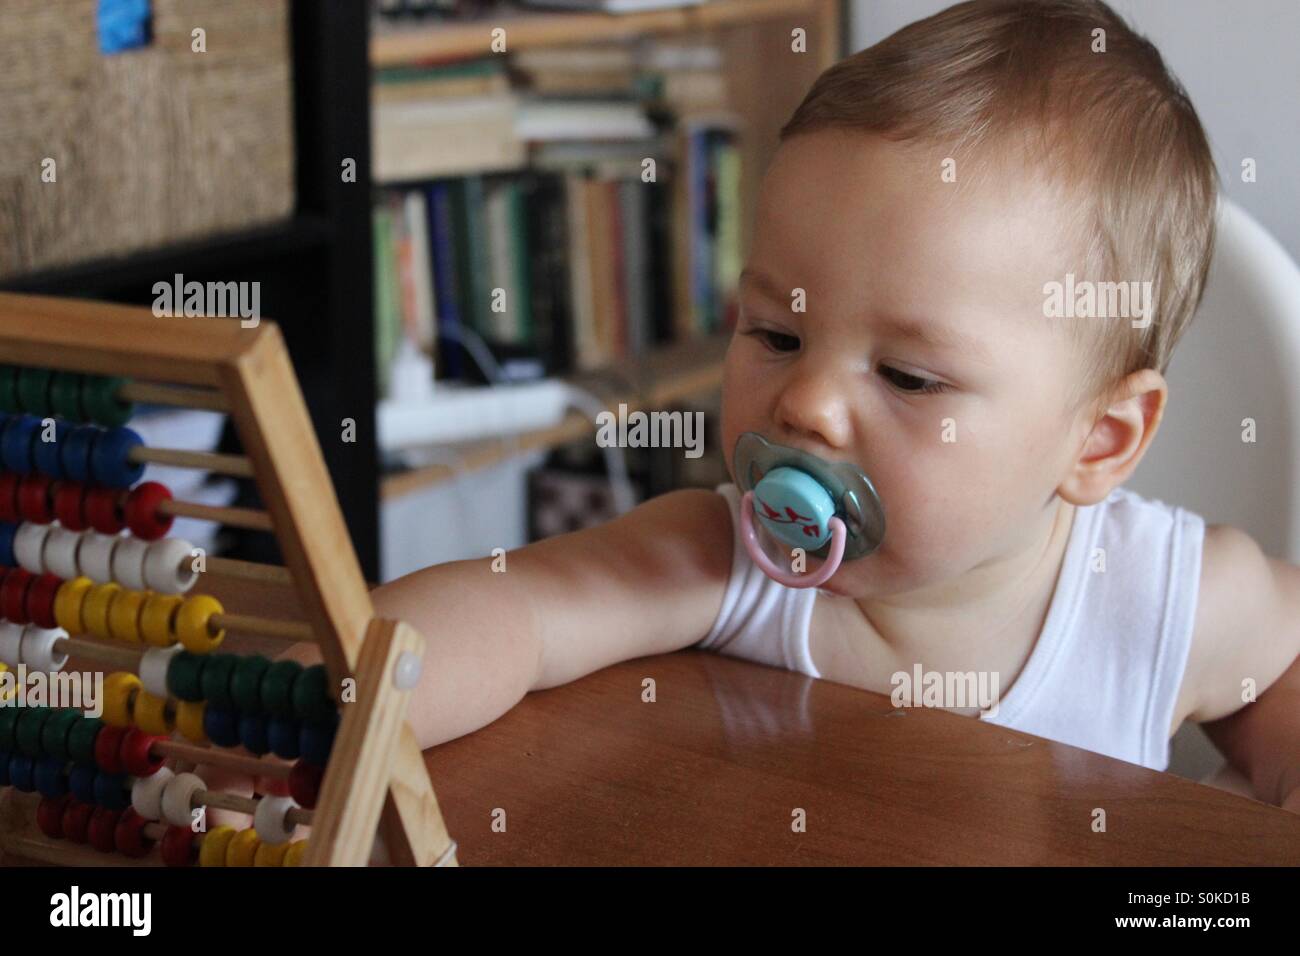 9 months old baby boy with a pacifier in his mouth , is touching the abacus Stock Photo